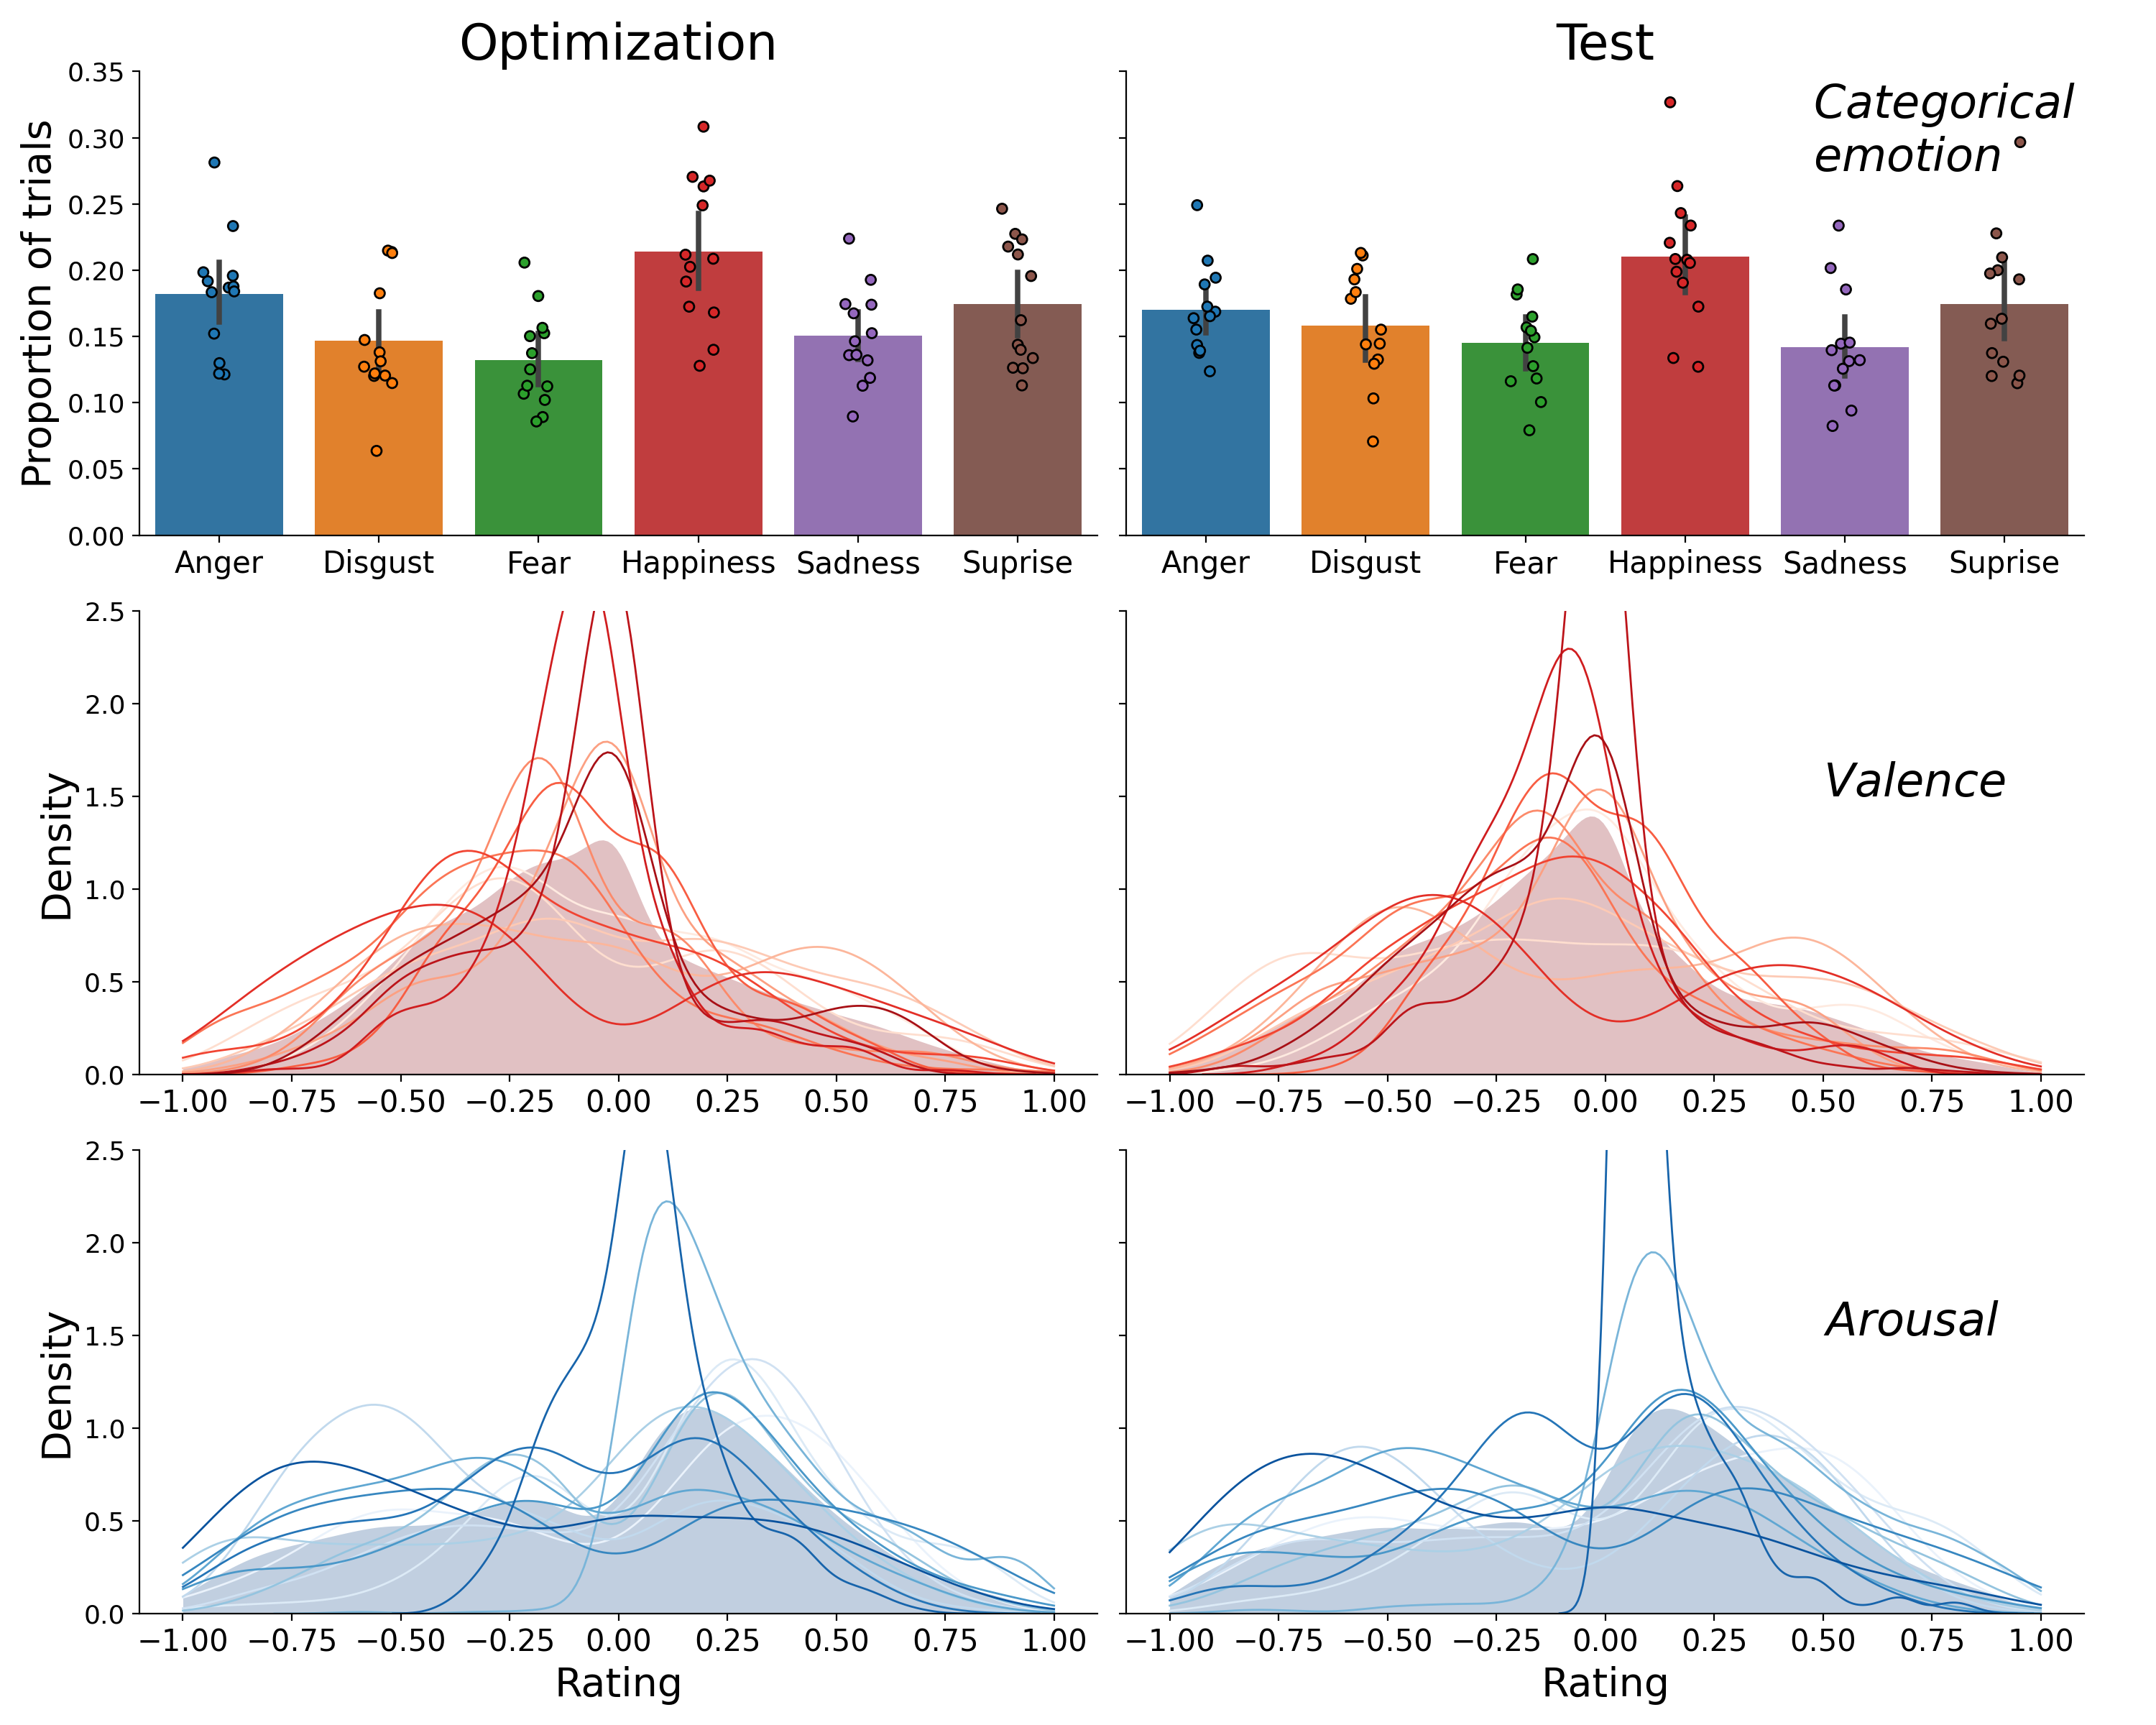 Distribution of the categorical emotion labels (bars height represents the average proportion; dots represent individual participants; top) and the distribution of the valence ratings (middle) and arousal rating (bottom), shown separately for the optimization set (left) and test set (right). In the valence and arousal subplots, the filled area represents the distribution of the ratings pooled over participants and the lines represents the distribution of the ratings of individual participants. The valence and arousal distributions were created using kernel density estimation as implemented in the Python package seaborn (which uses the scipy function gaussian_kde with Scott’s rule for bandwidth selection).